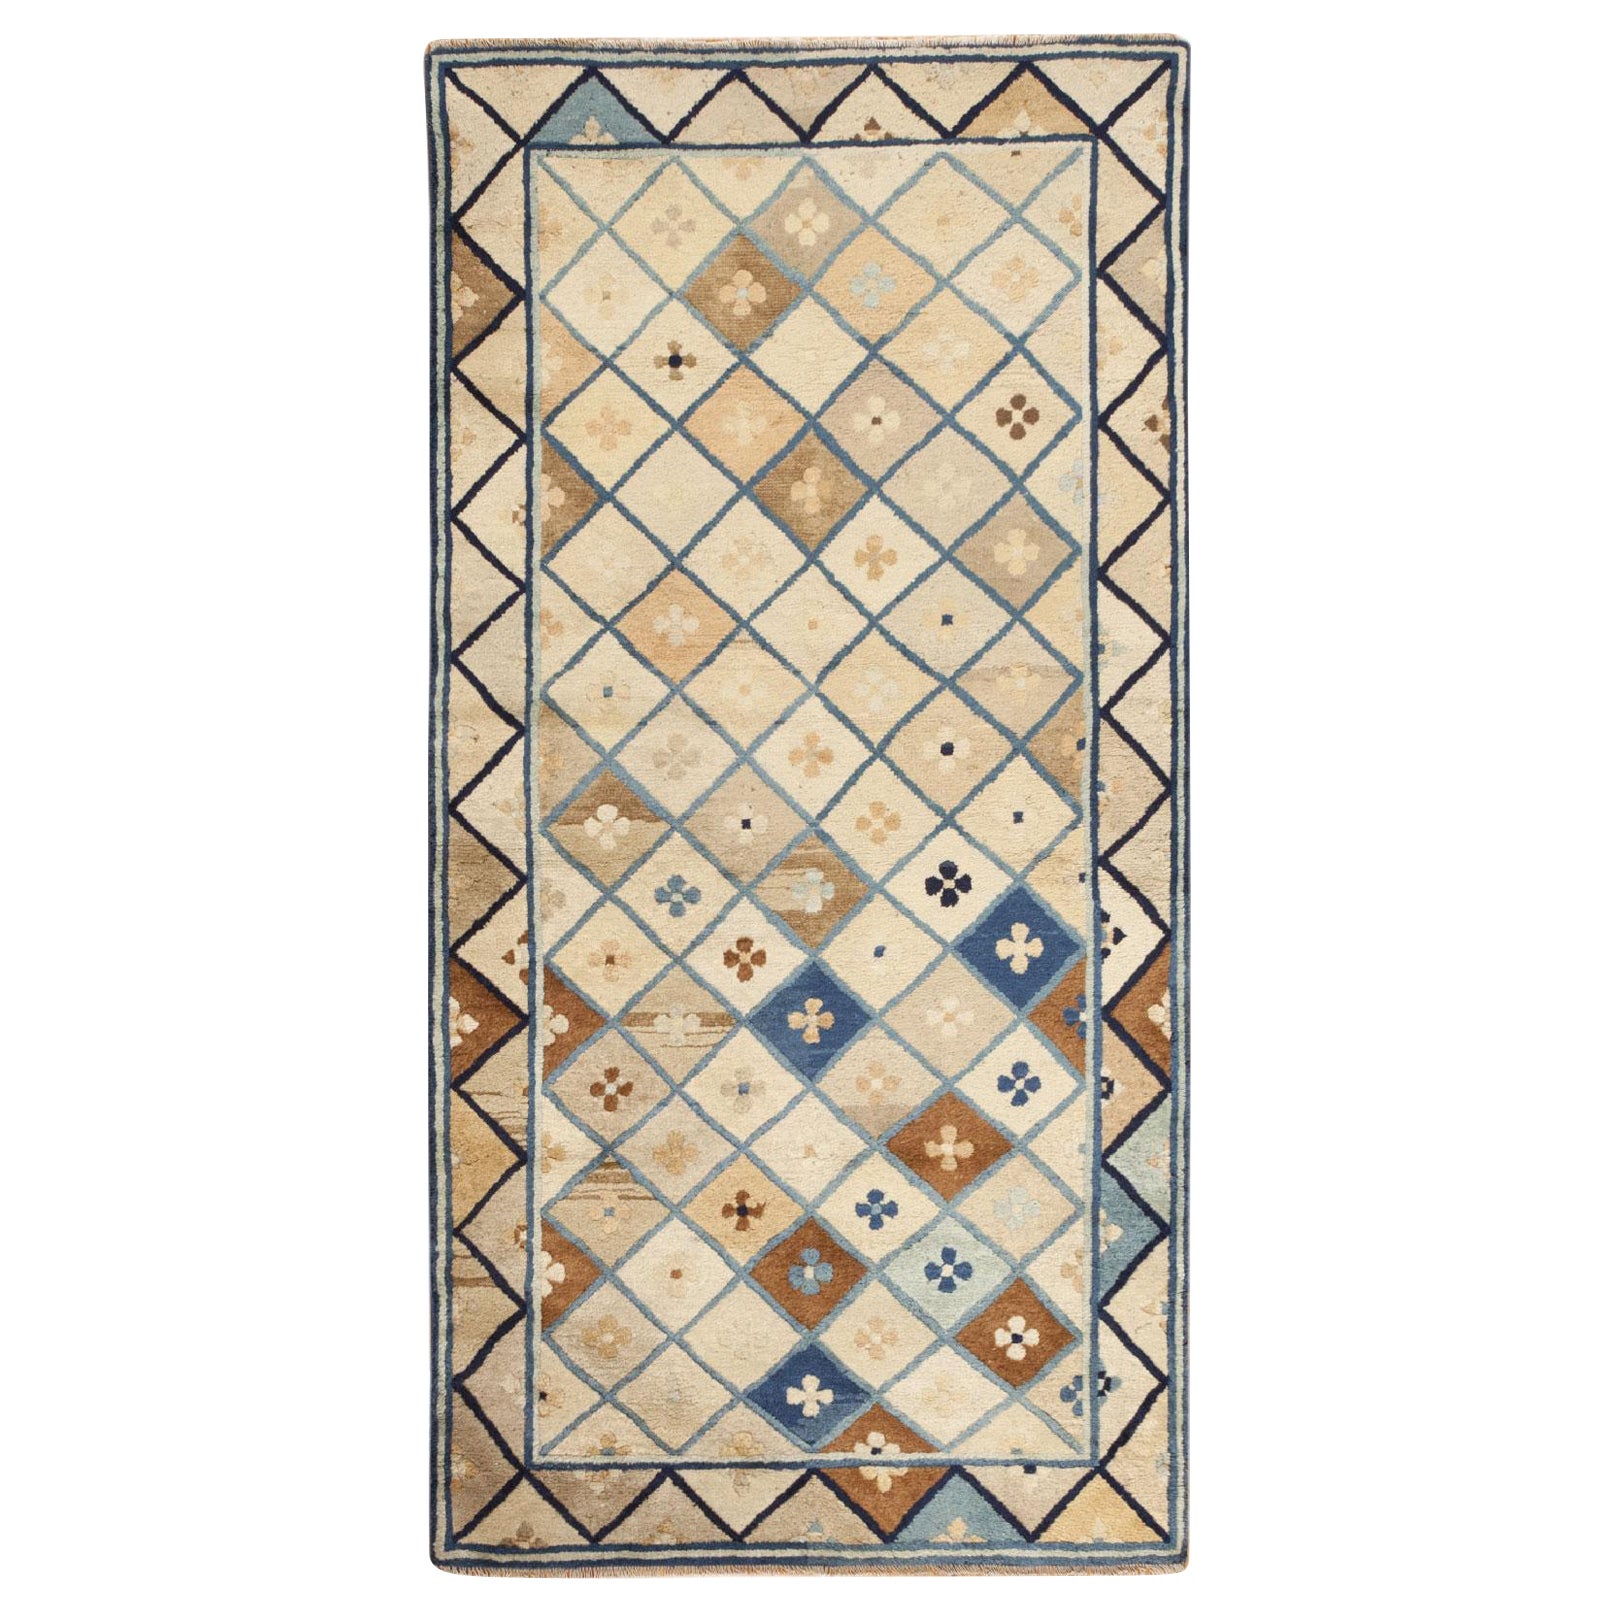 Tapis chinois ancien. Taille : 3 ft x 5 ft 8 in 